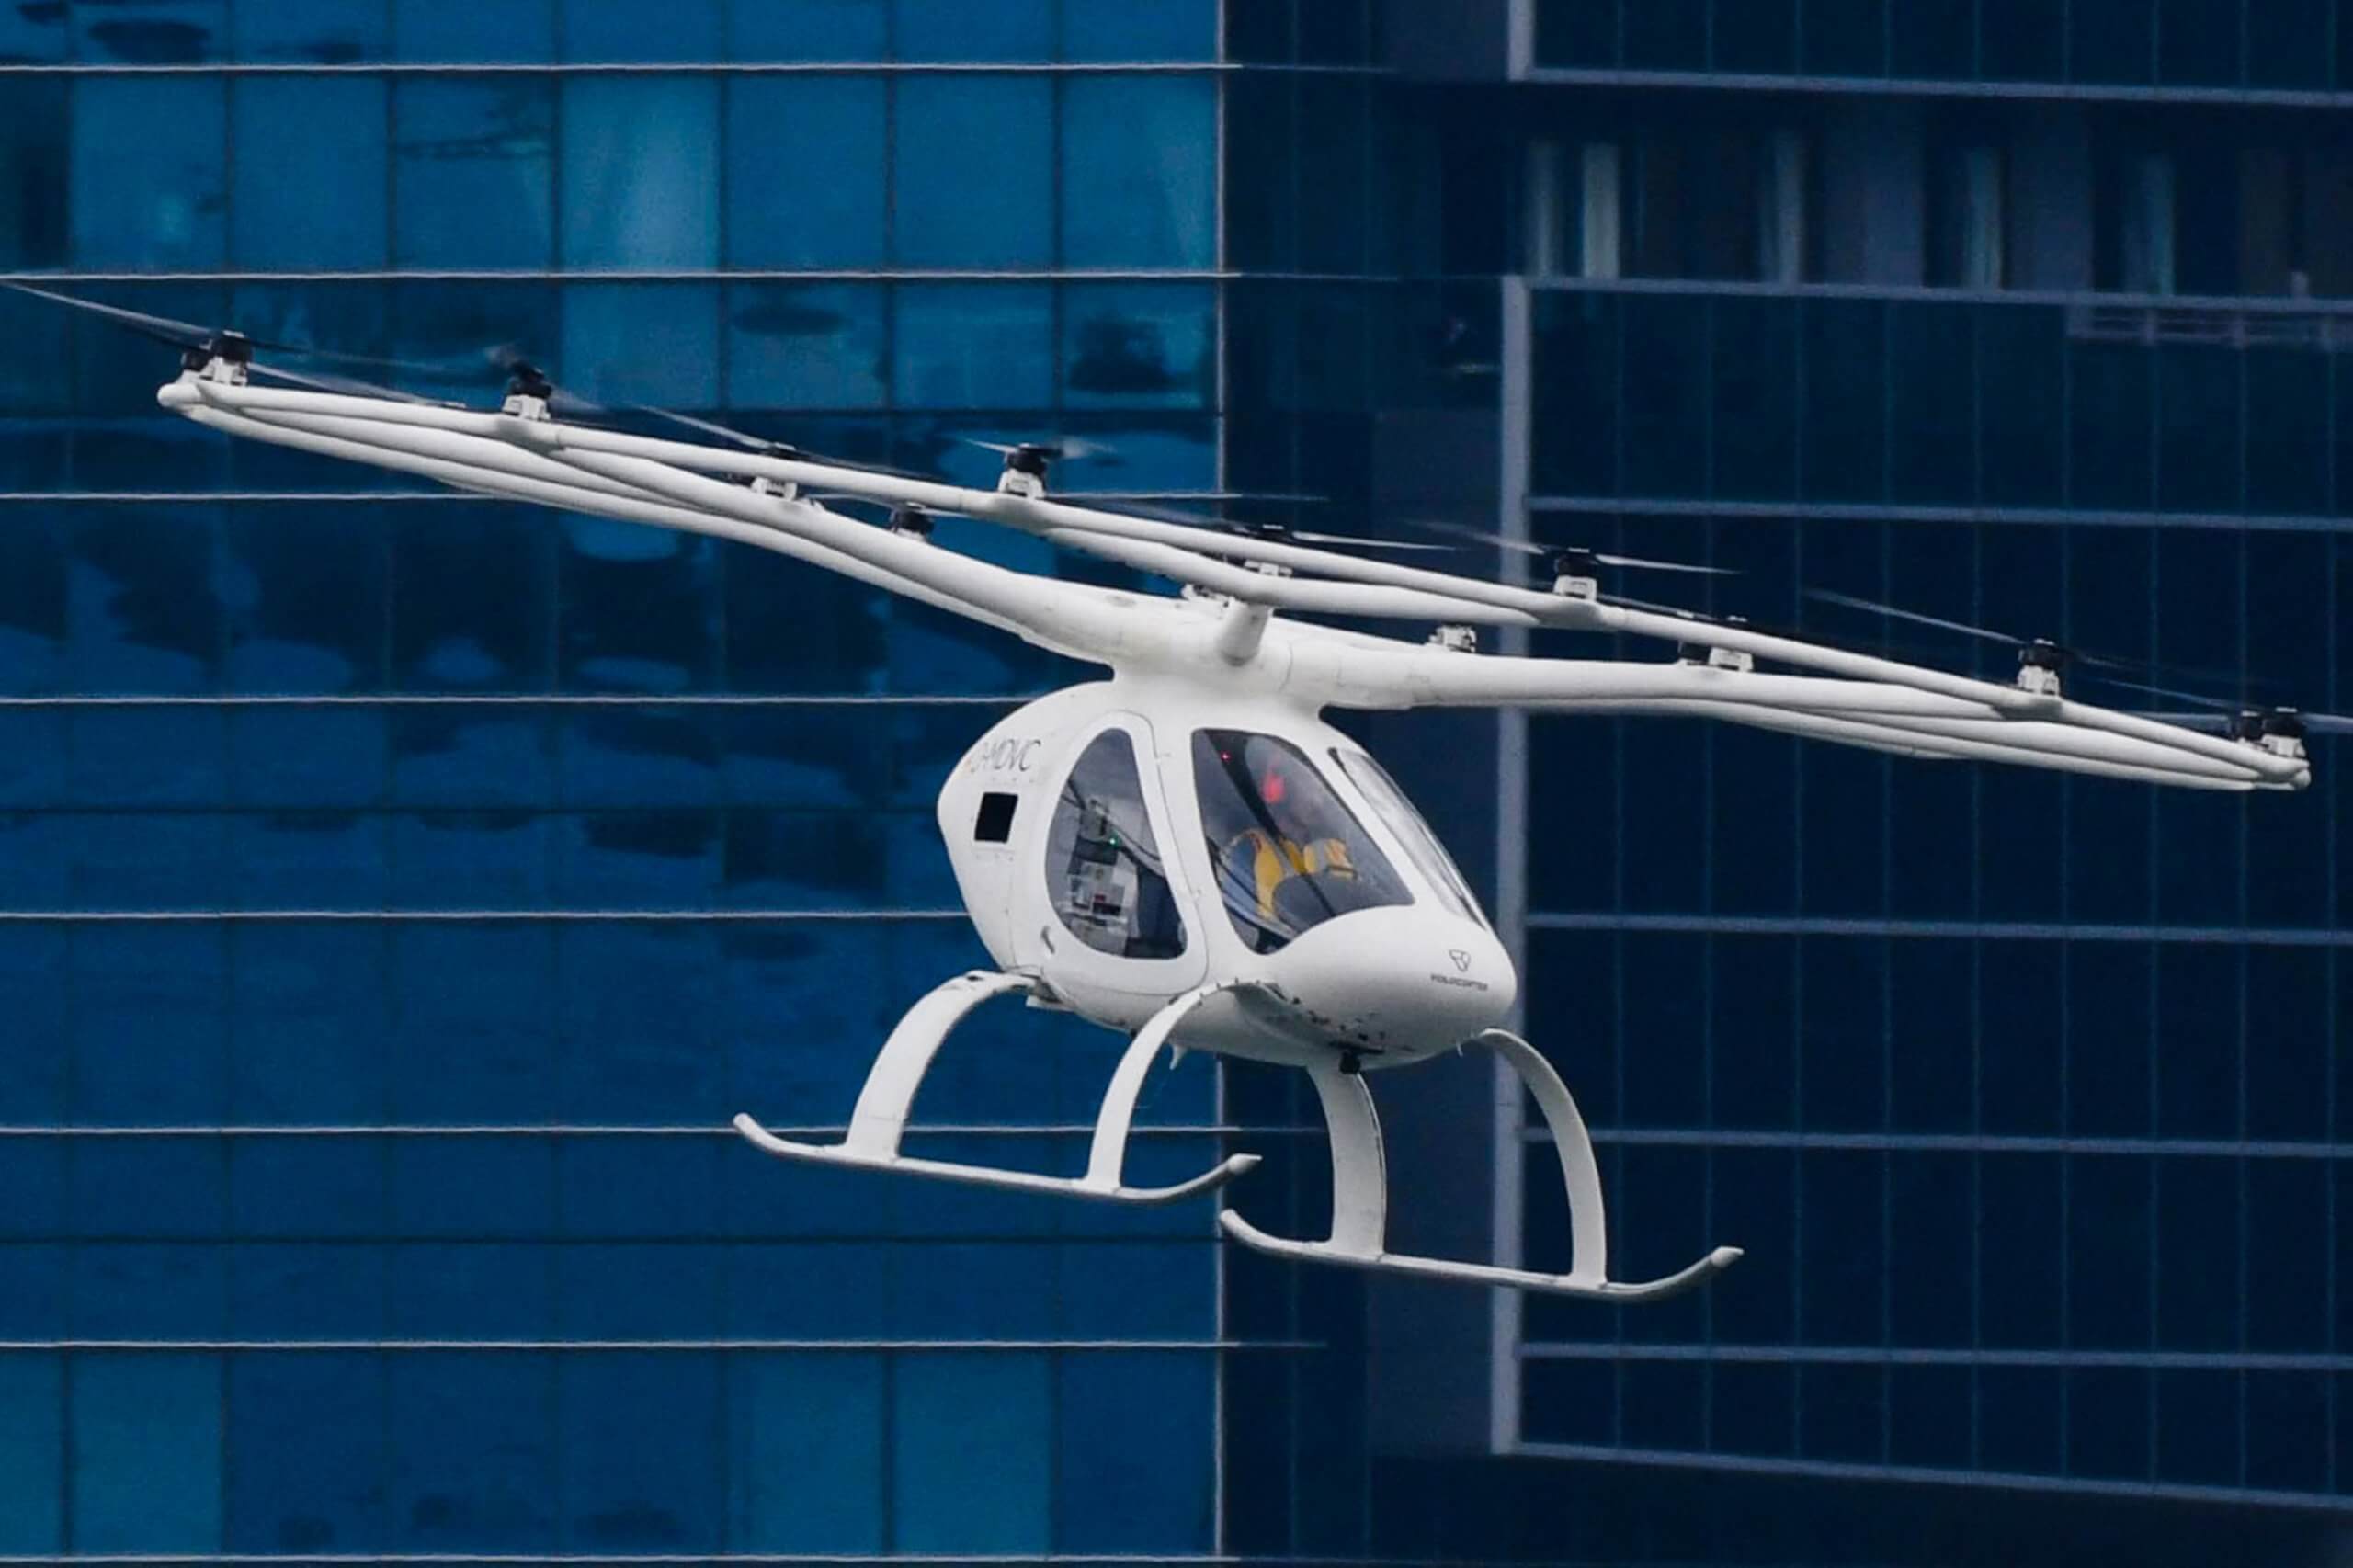 Flying vehicles are not such a pipe dream anymore. But which industries can benefit most from aerial automotives?